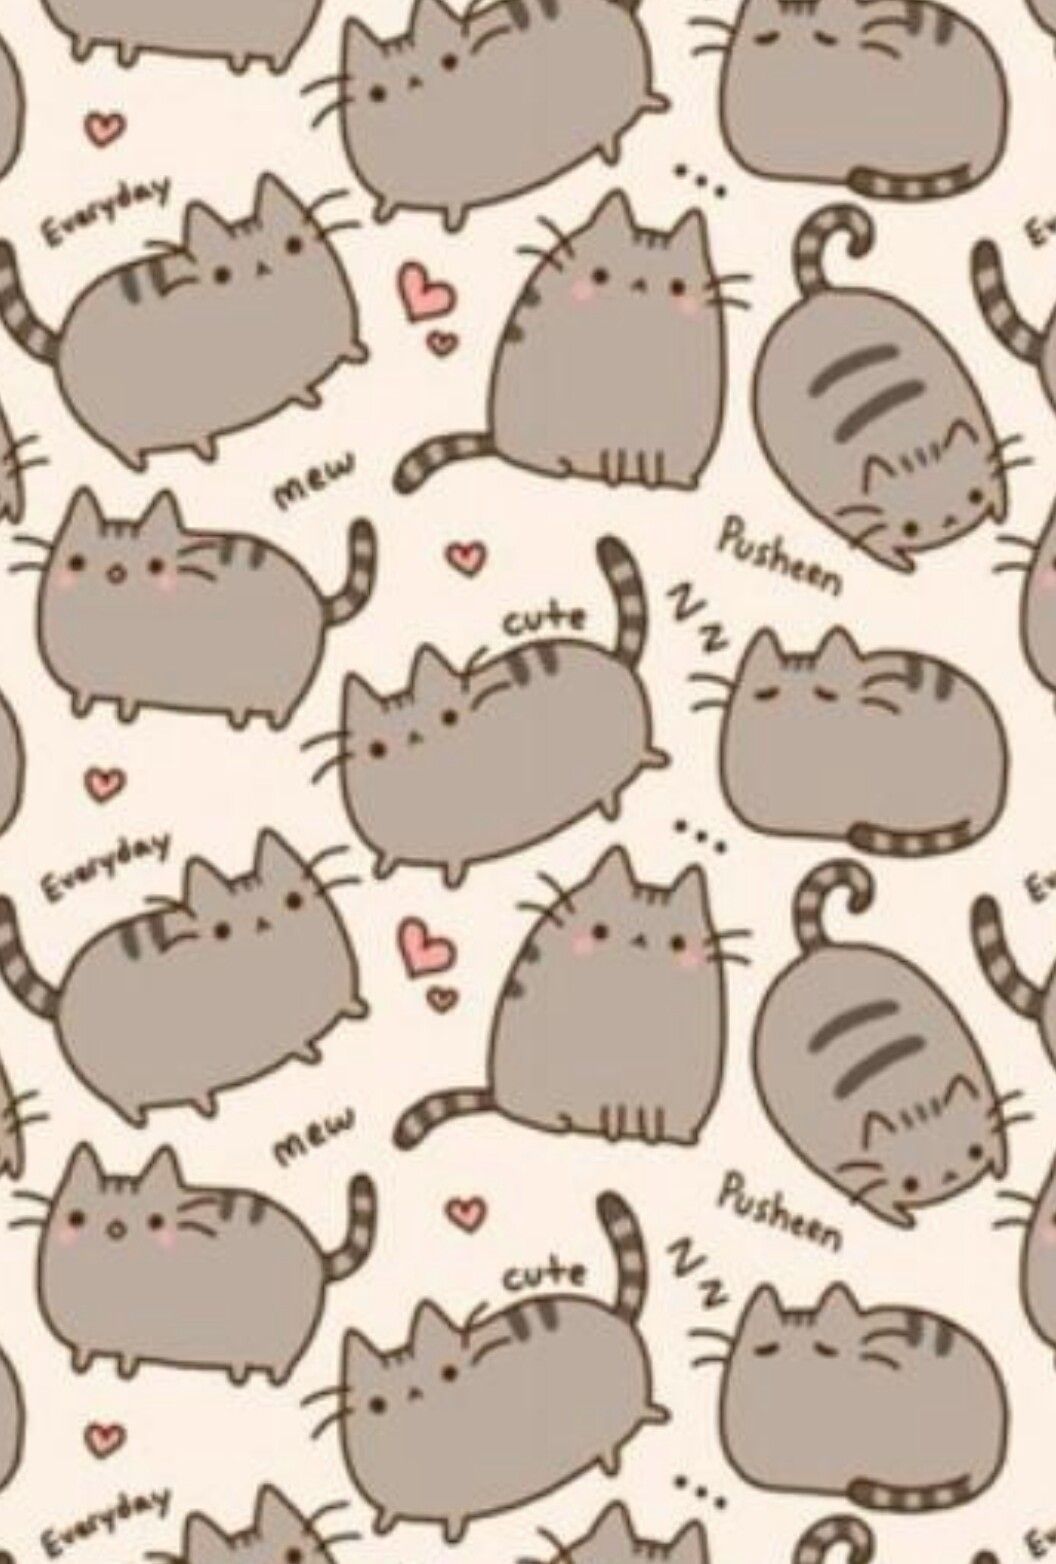 Pin By Gabby On Cats Pusheen Cat And Wallpaper